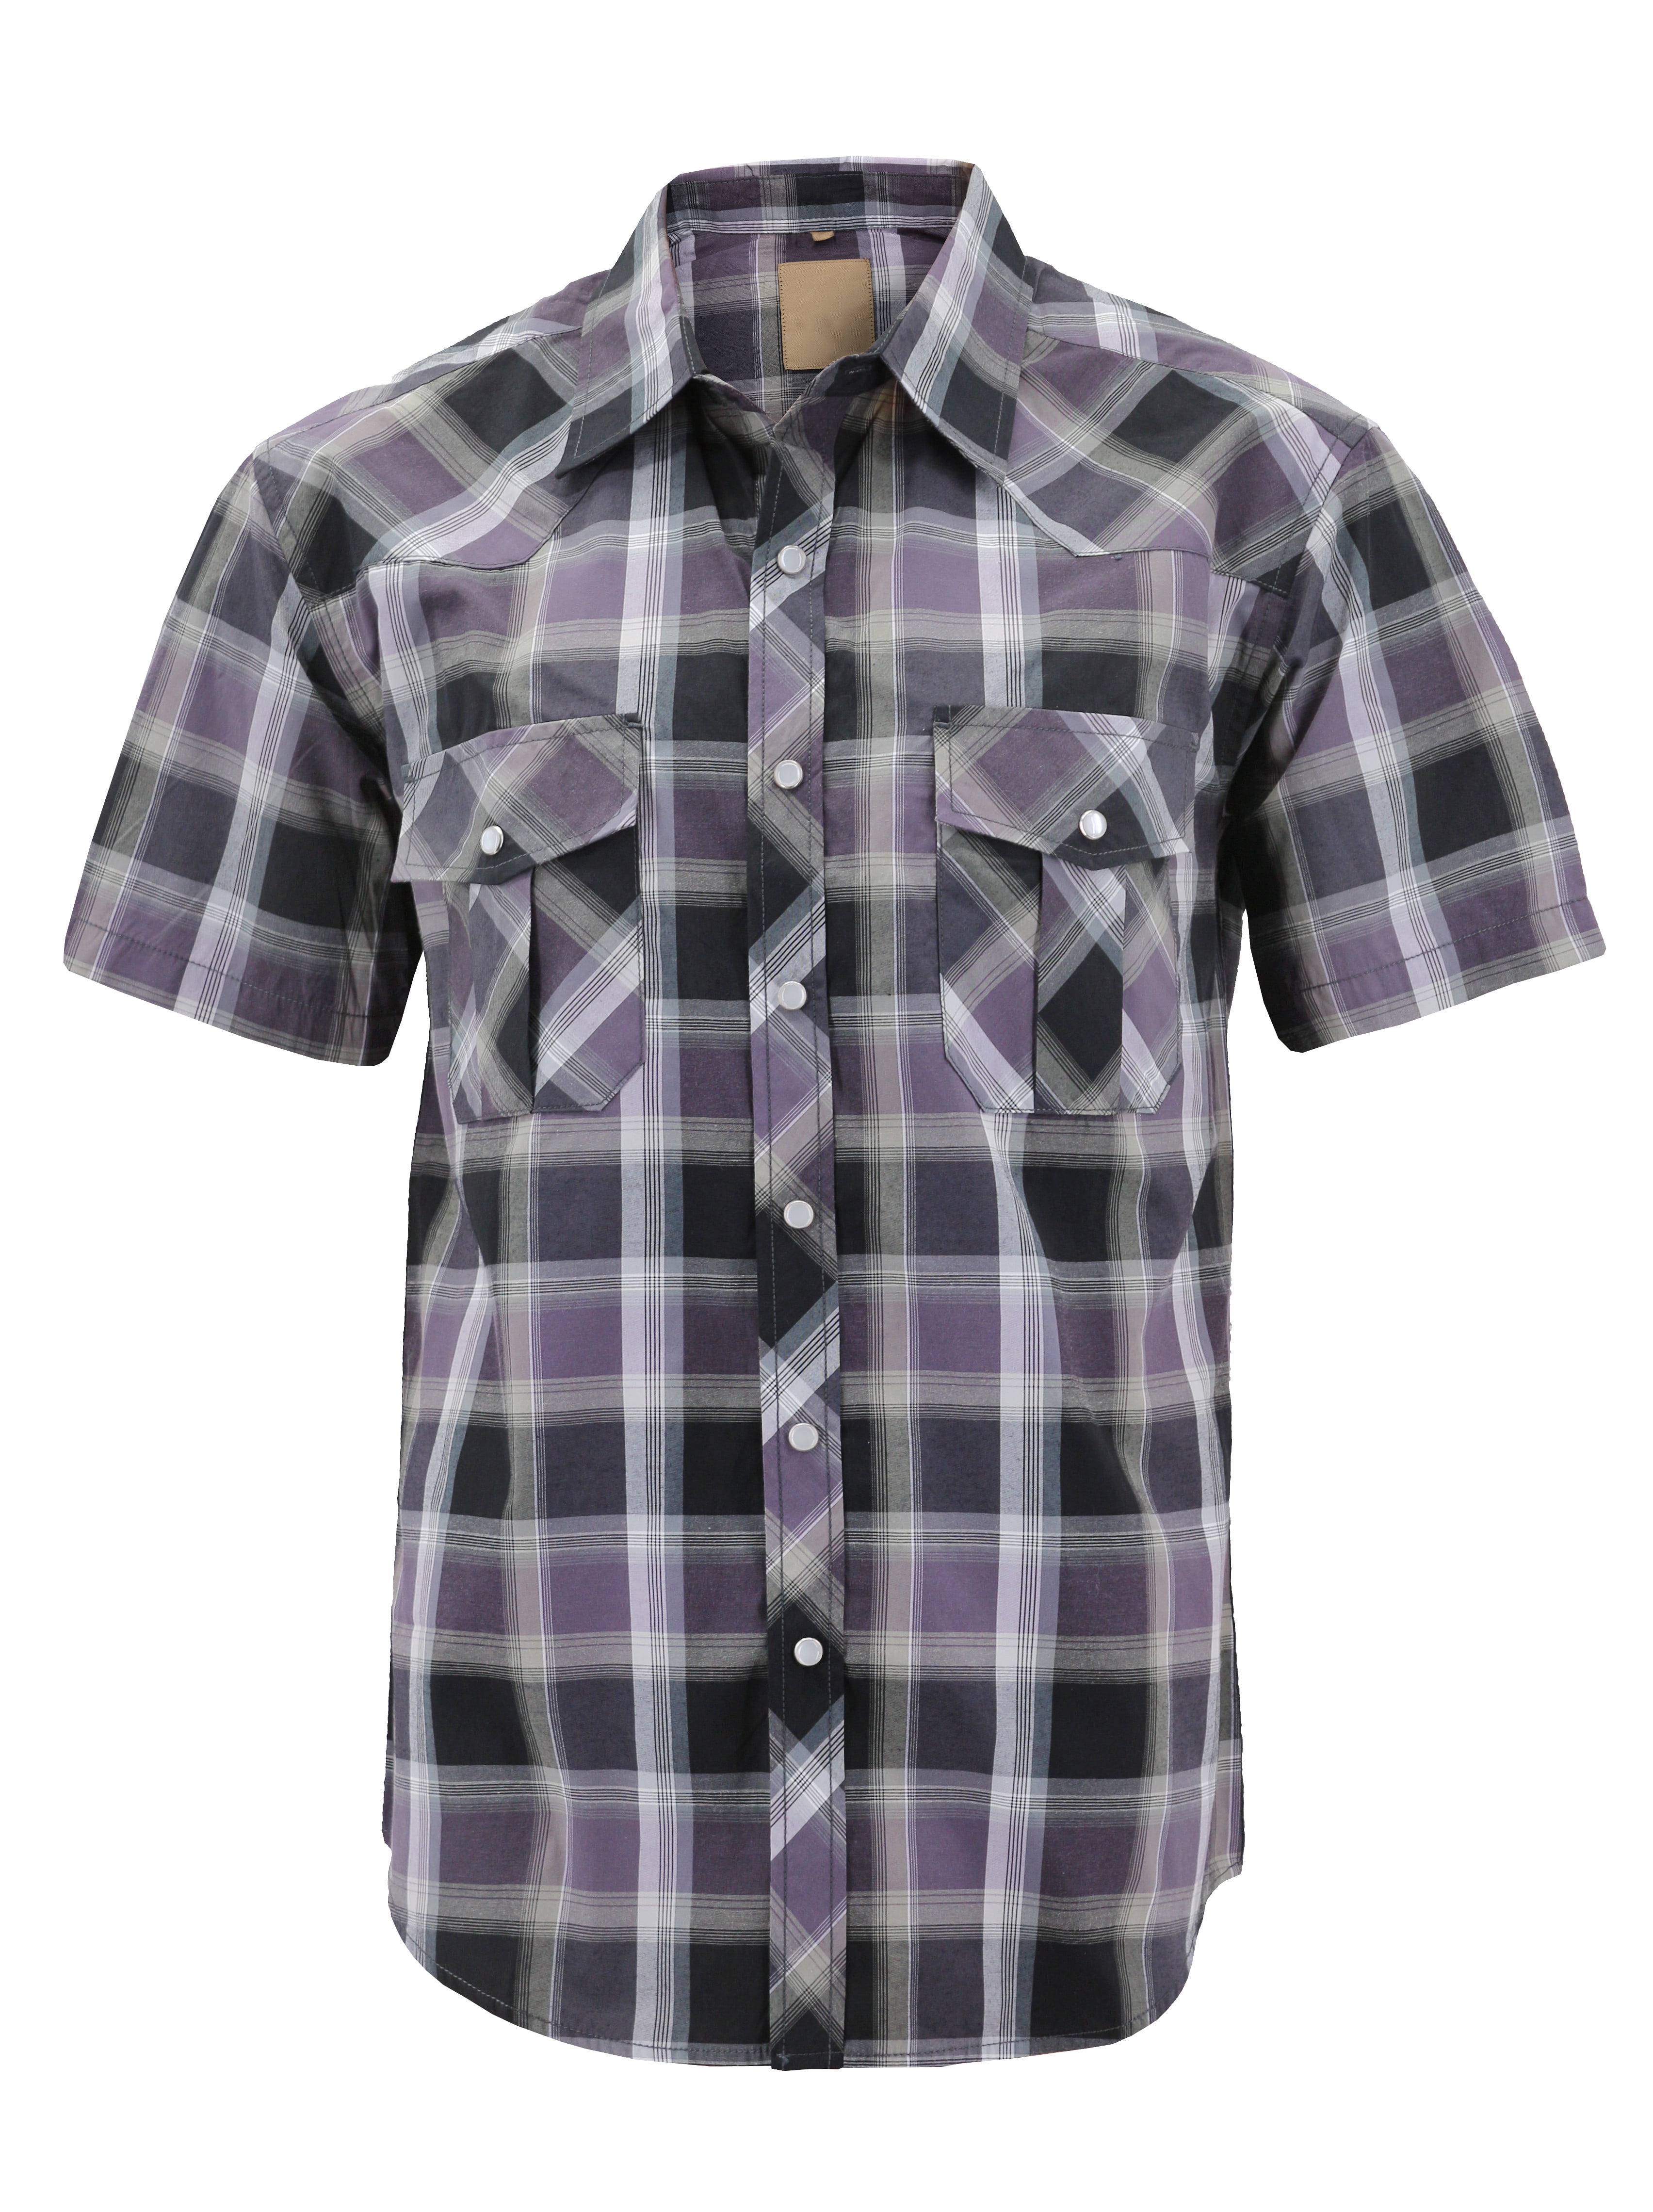 Mens Short Sleeve Western Shirts with Pearl Snap Button Up Casual Regular Fit Plaid Shirts 